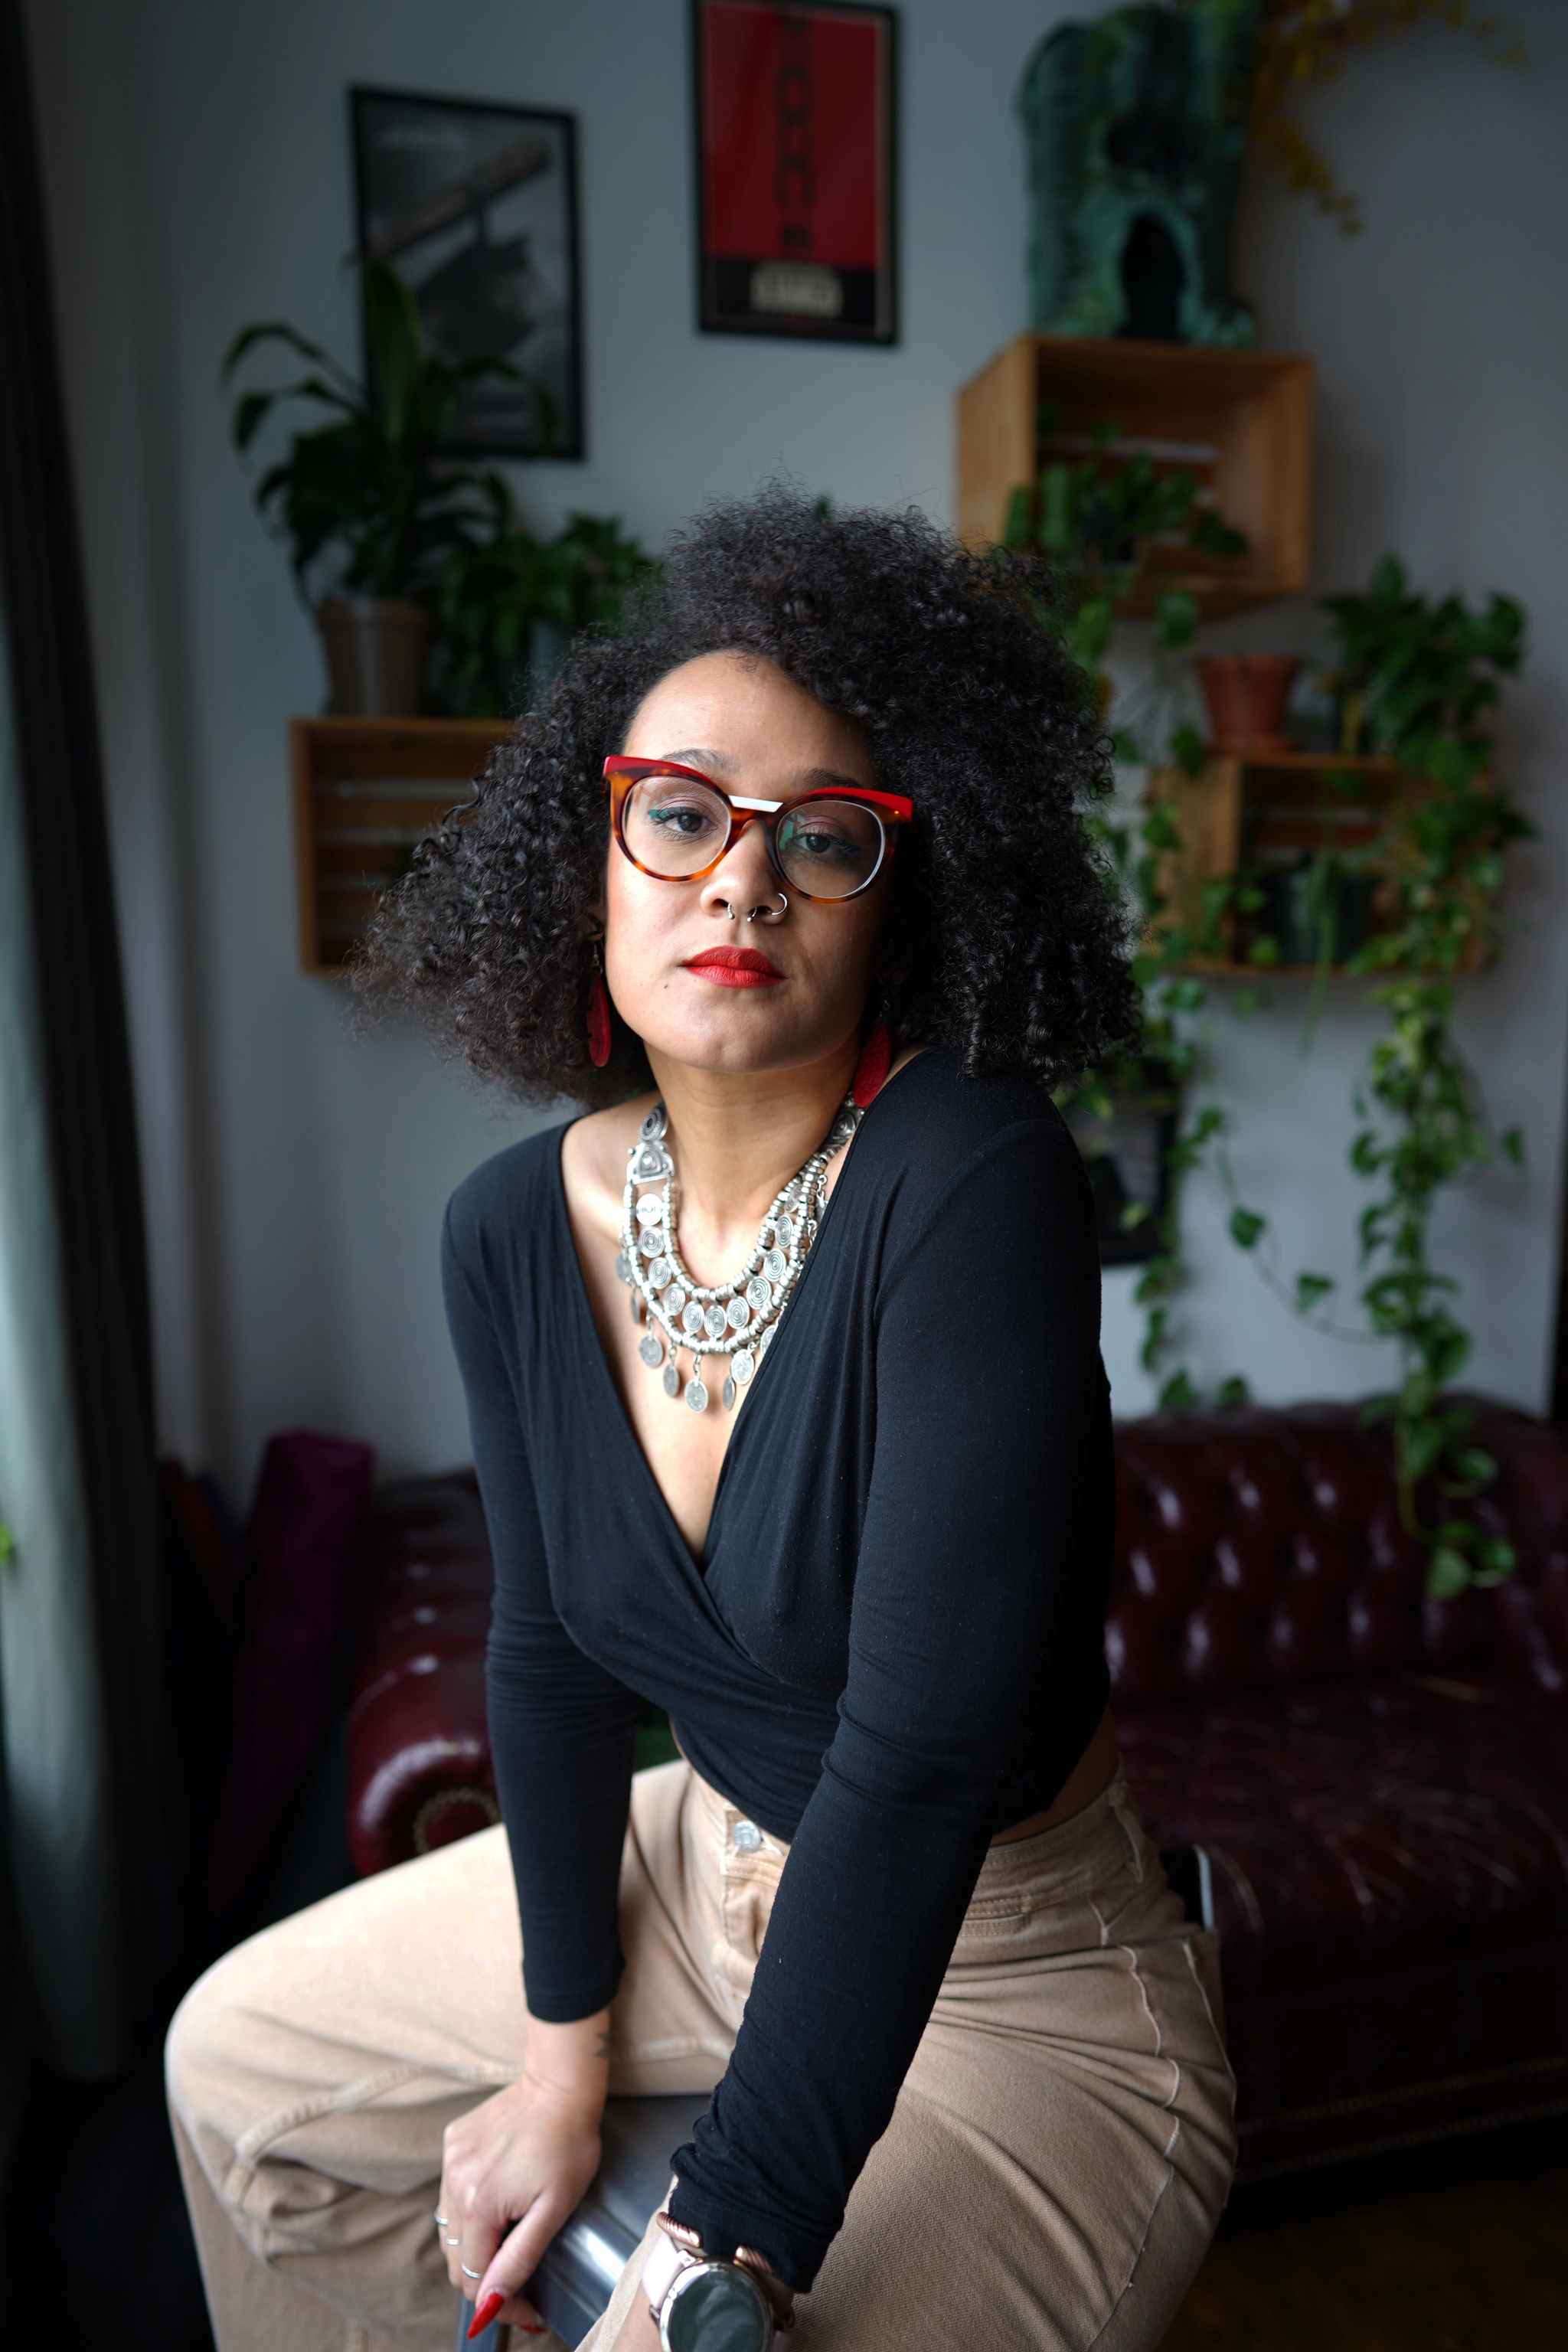 A photo of artist Eleanor Kipping, a Black woman wearing tan pants and a deep v-neck shirt, paired with a large necklace and red-rimmed glasses. She sits in what looks like a living room with plants and a plush leather sofa behind her. 